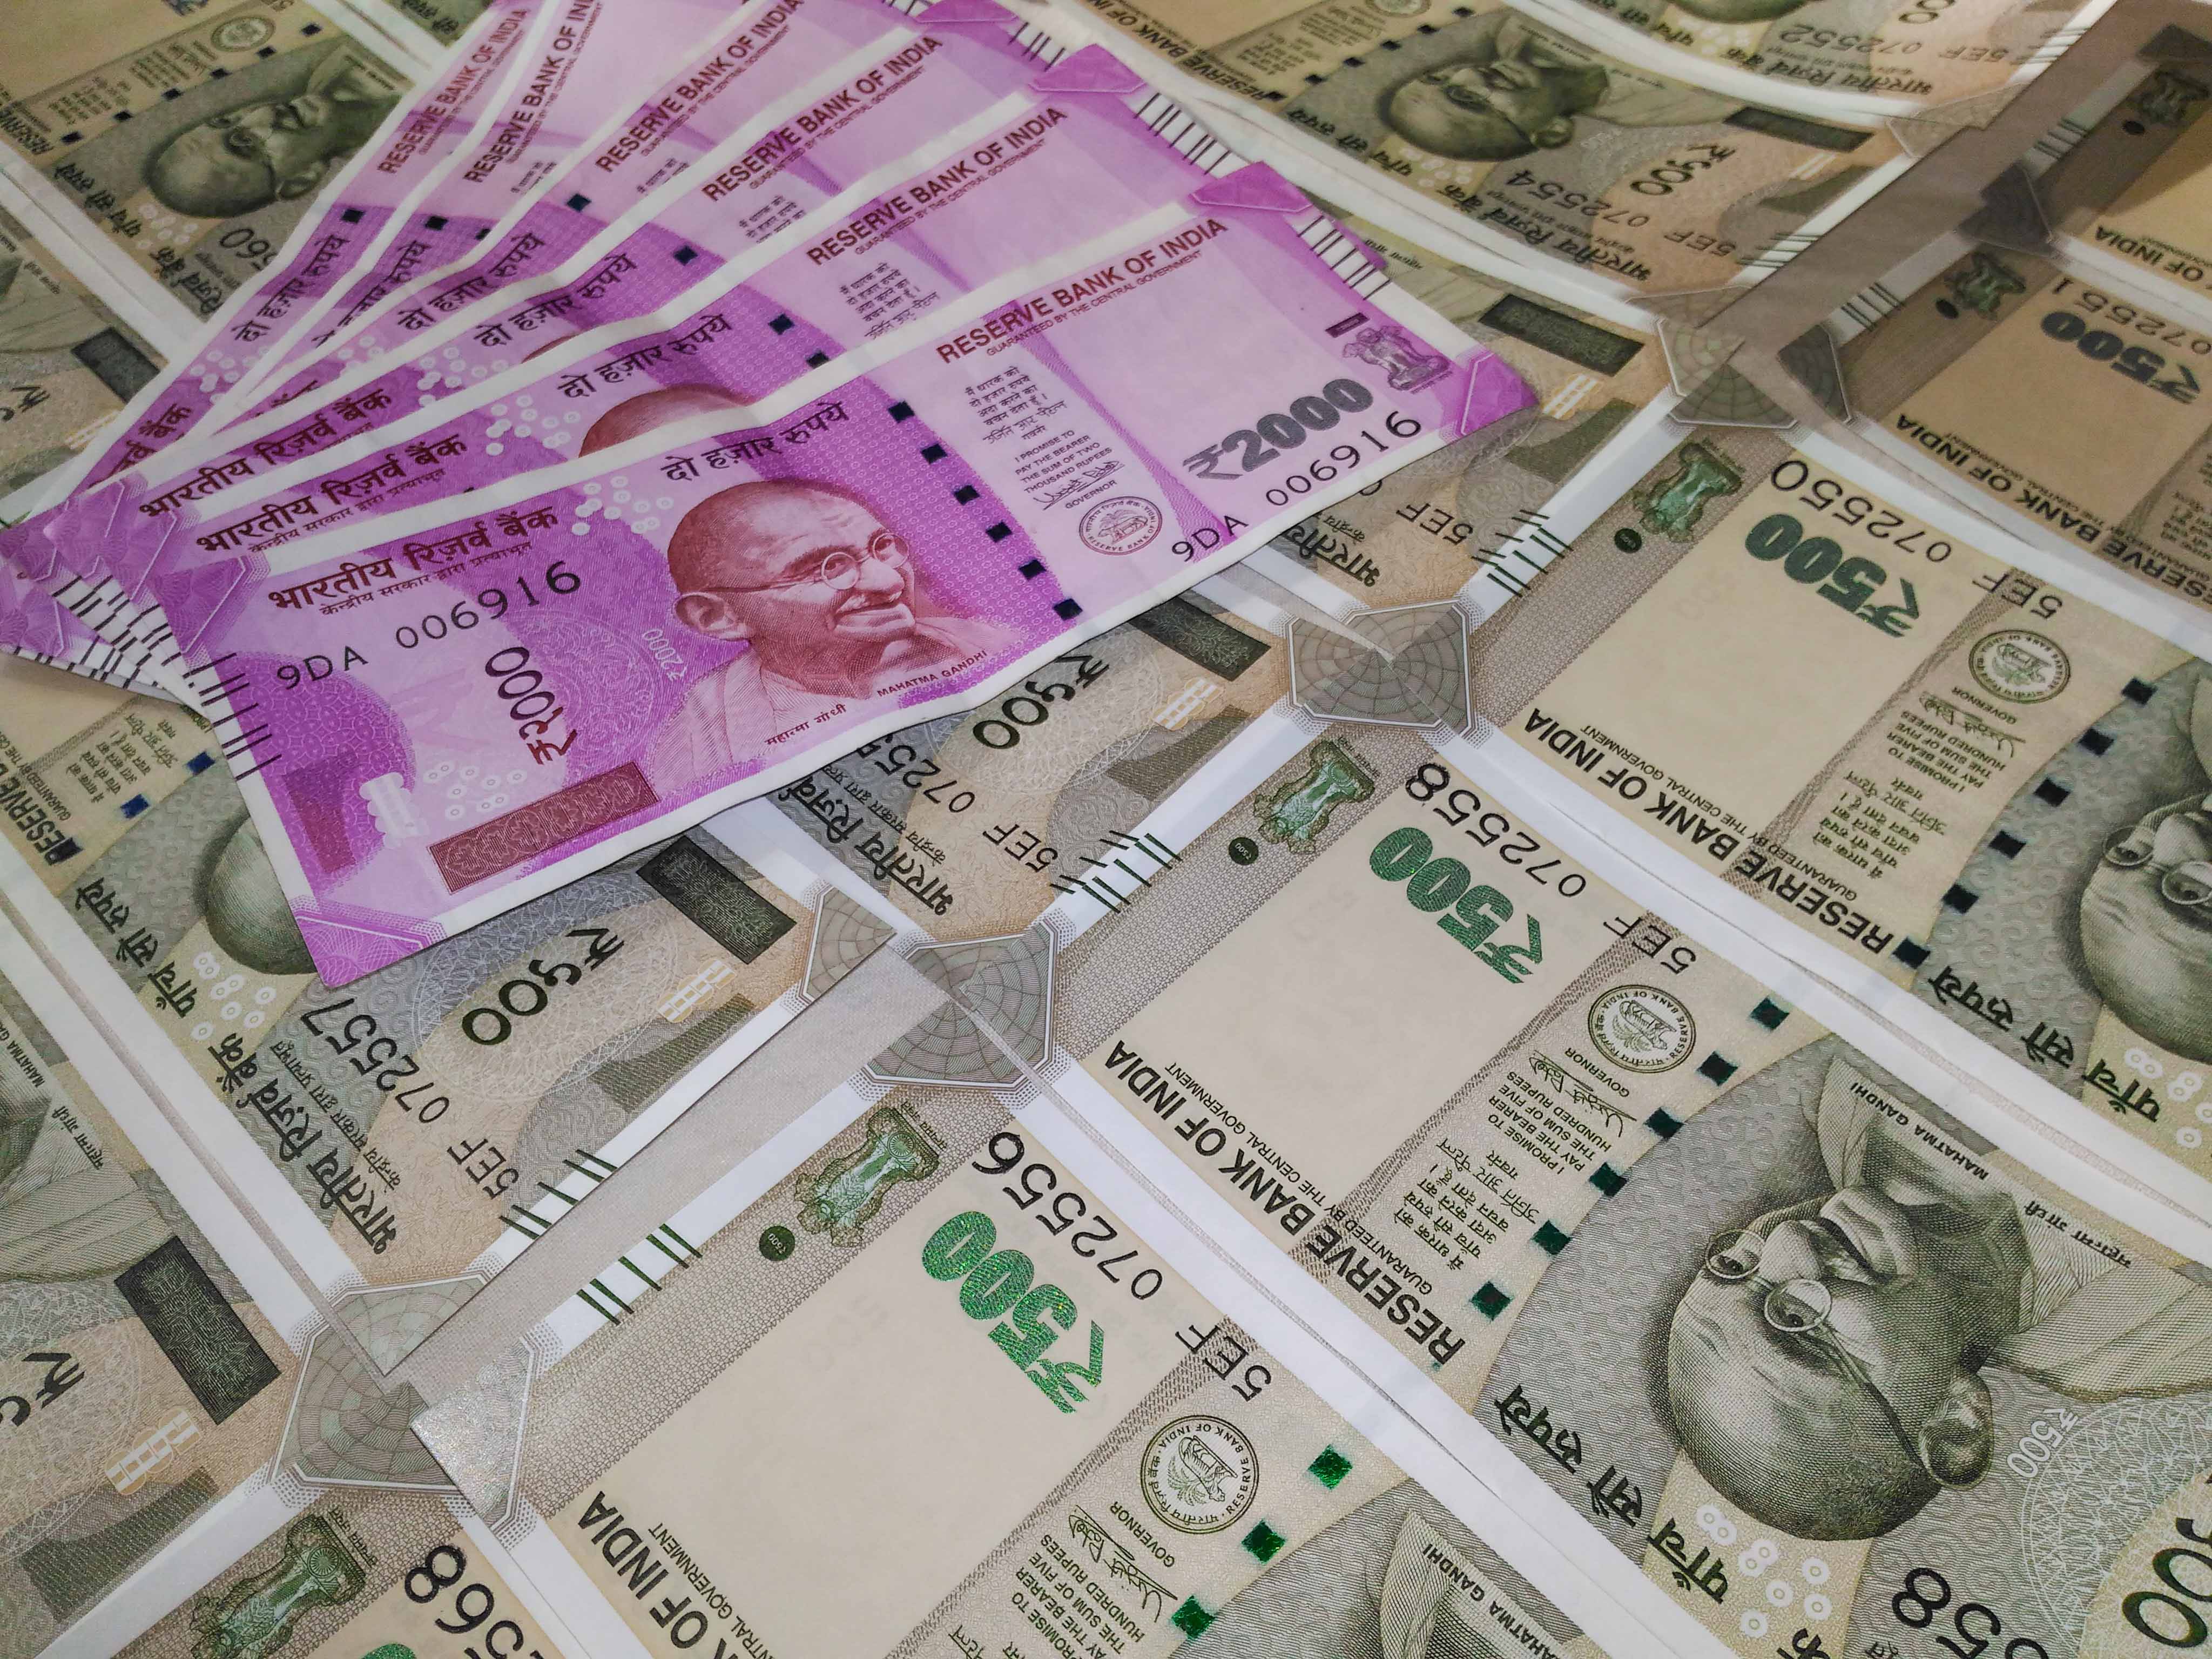 Rs 2000, Rs 500 notes, 1,000 notes, Indian government, Currency ban, Demonetisation, Indian currency, Note ban, Business news